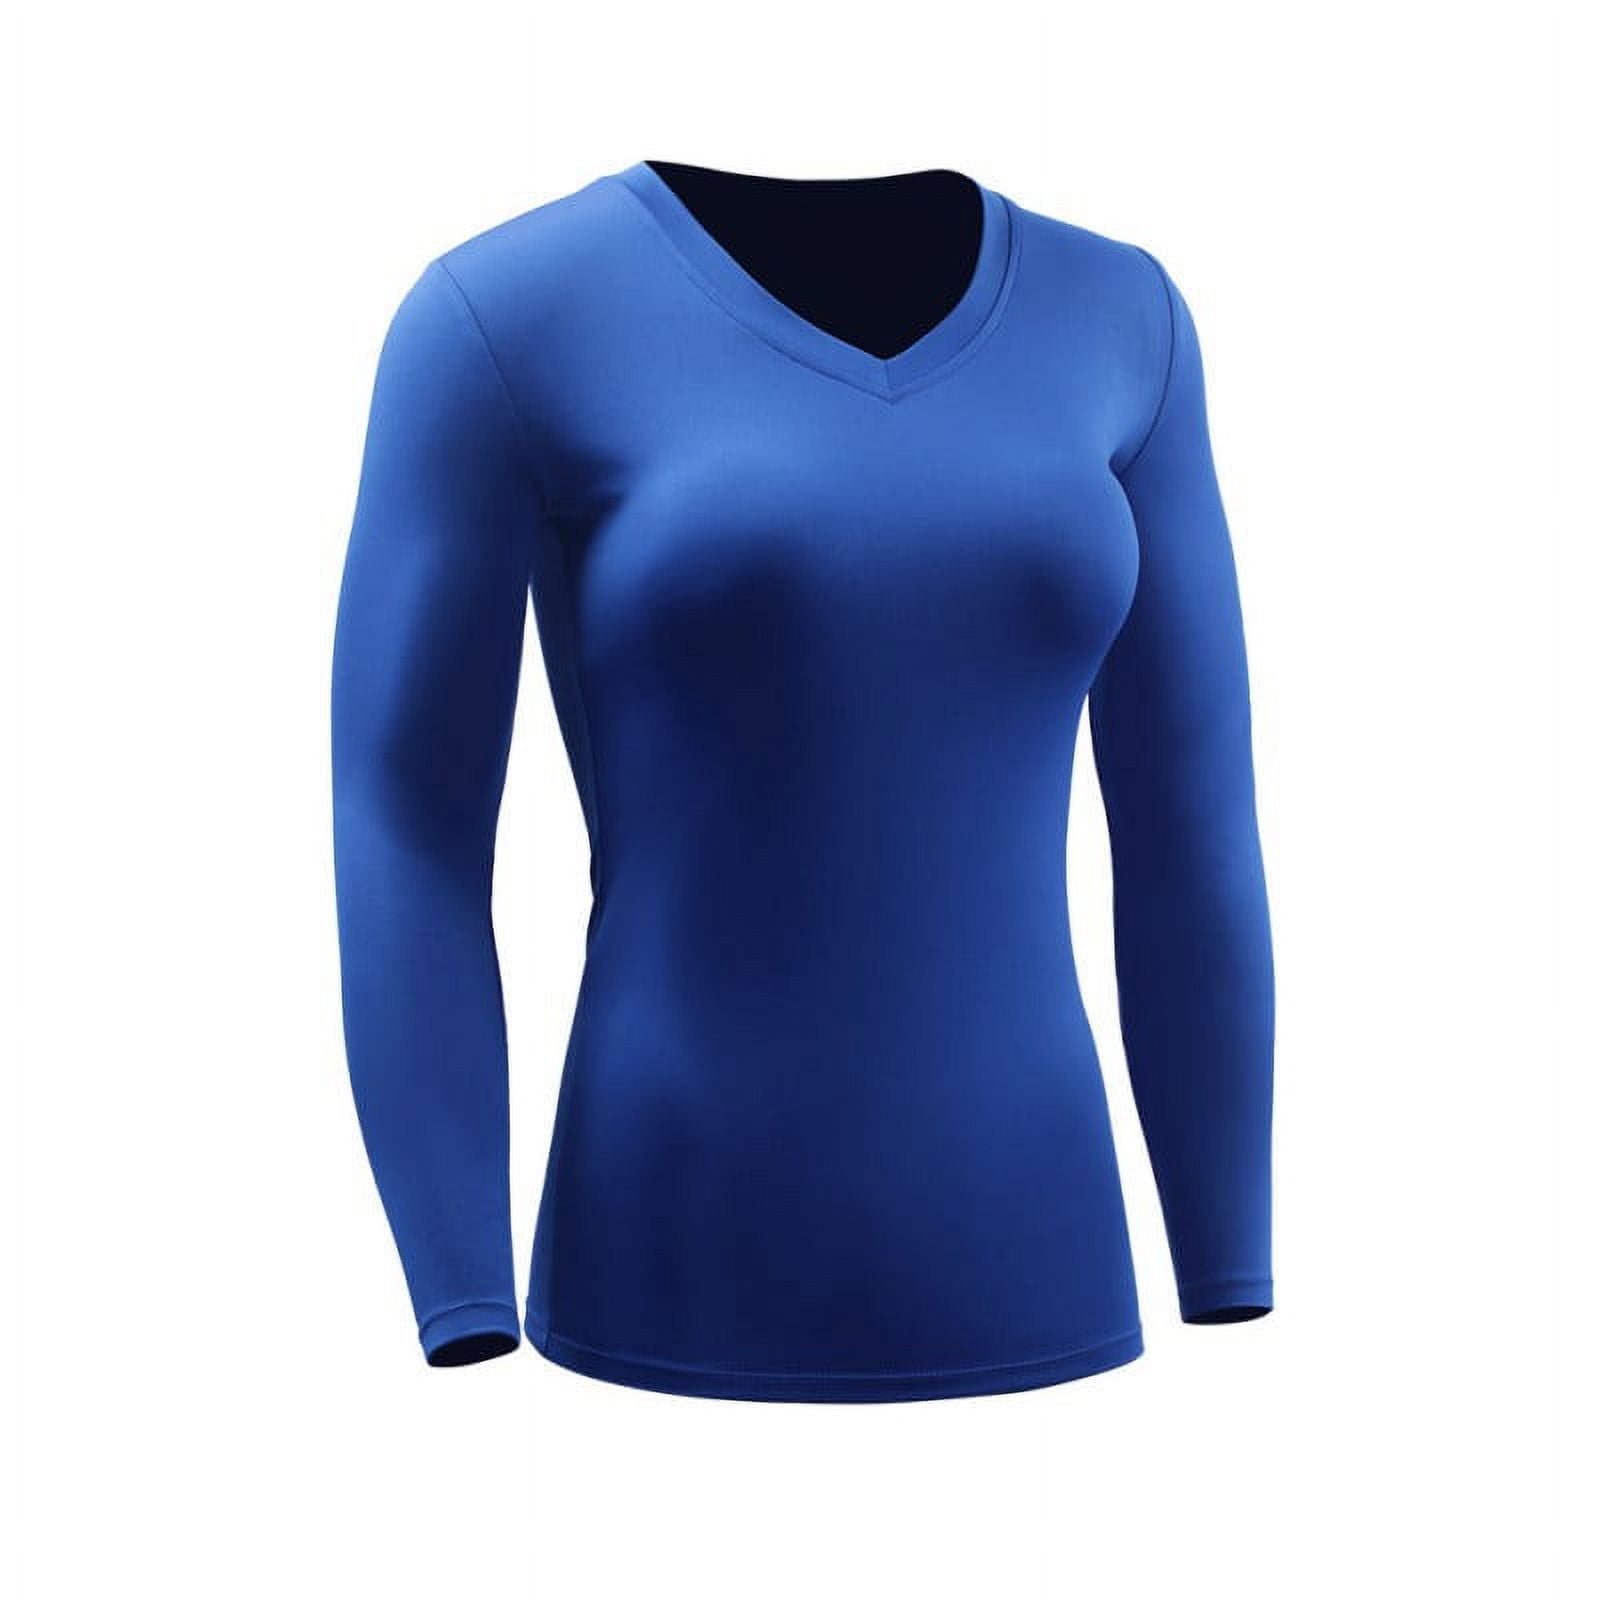 Women's Moisture Wicking Athletic Shirts Tight Quick-dry V-Neck Sports Tops Compression  Shirt Dry Fit Long Sleeve Running Athletic T-Shirt Workout Tops,Plus Size 